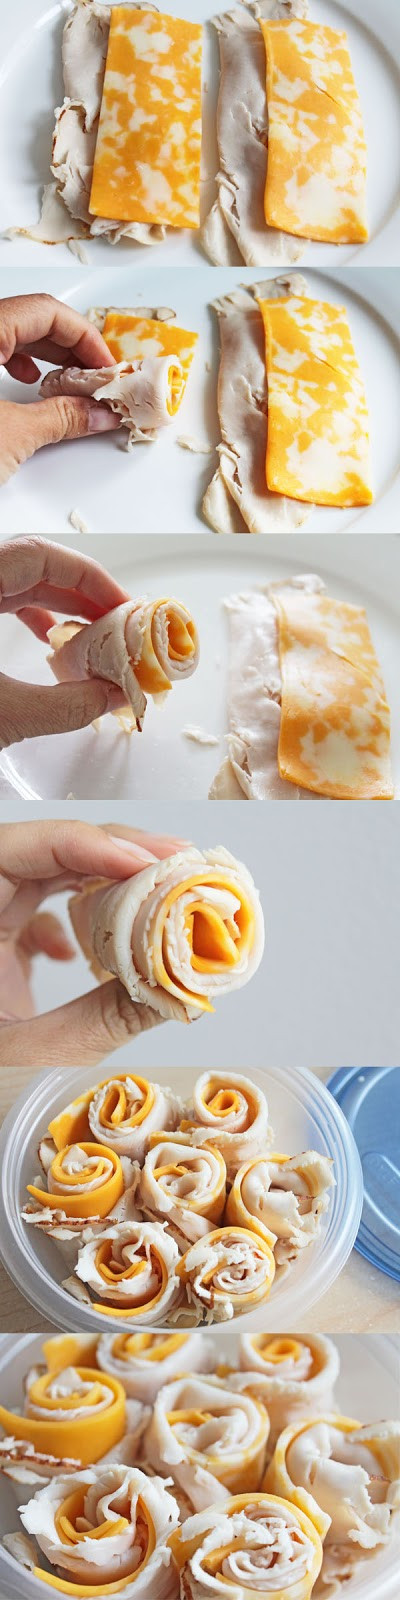 Healthy Snacks To Bring To Work
 Easy to Make Snacks Turkey and Cheese Rolls Recipe